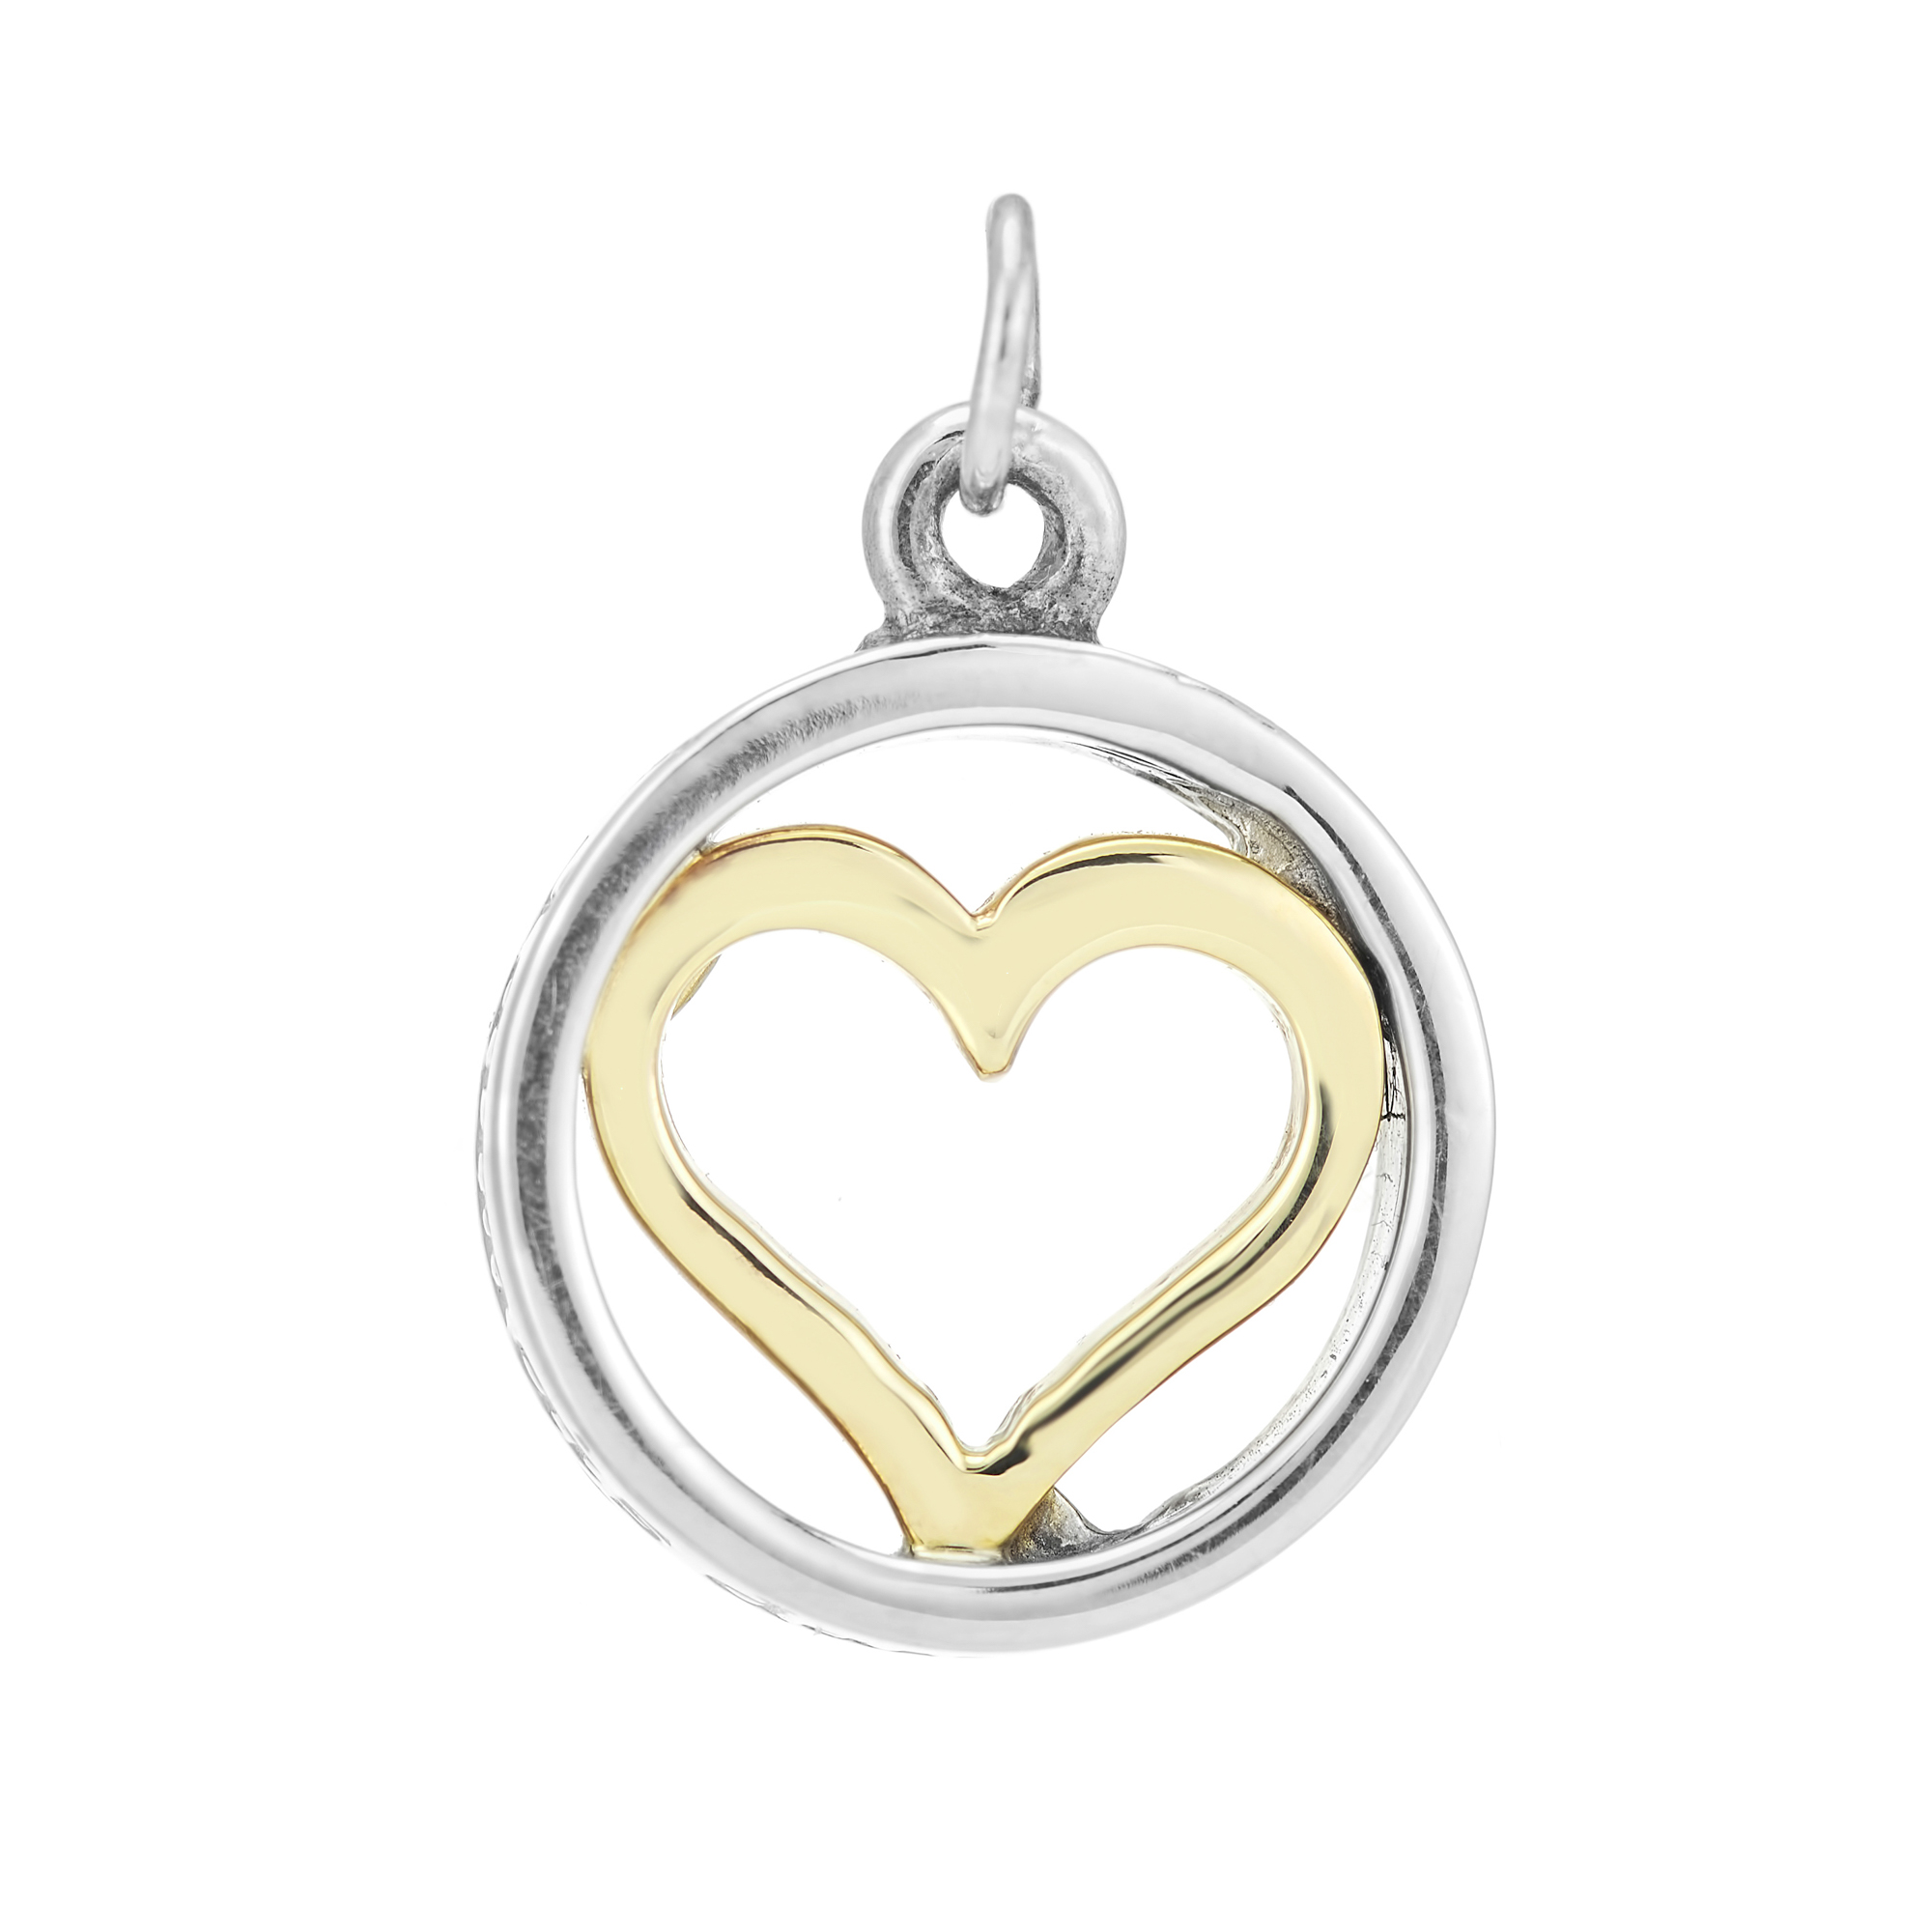 Sterling Silver and 9ct Yellow Gold Charm / Pendant